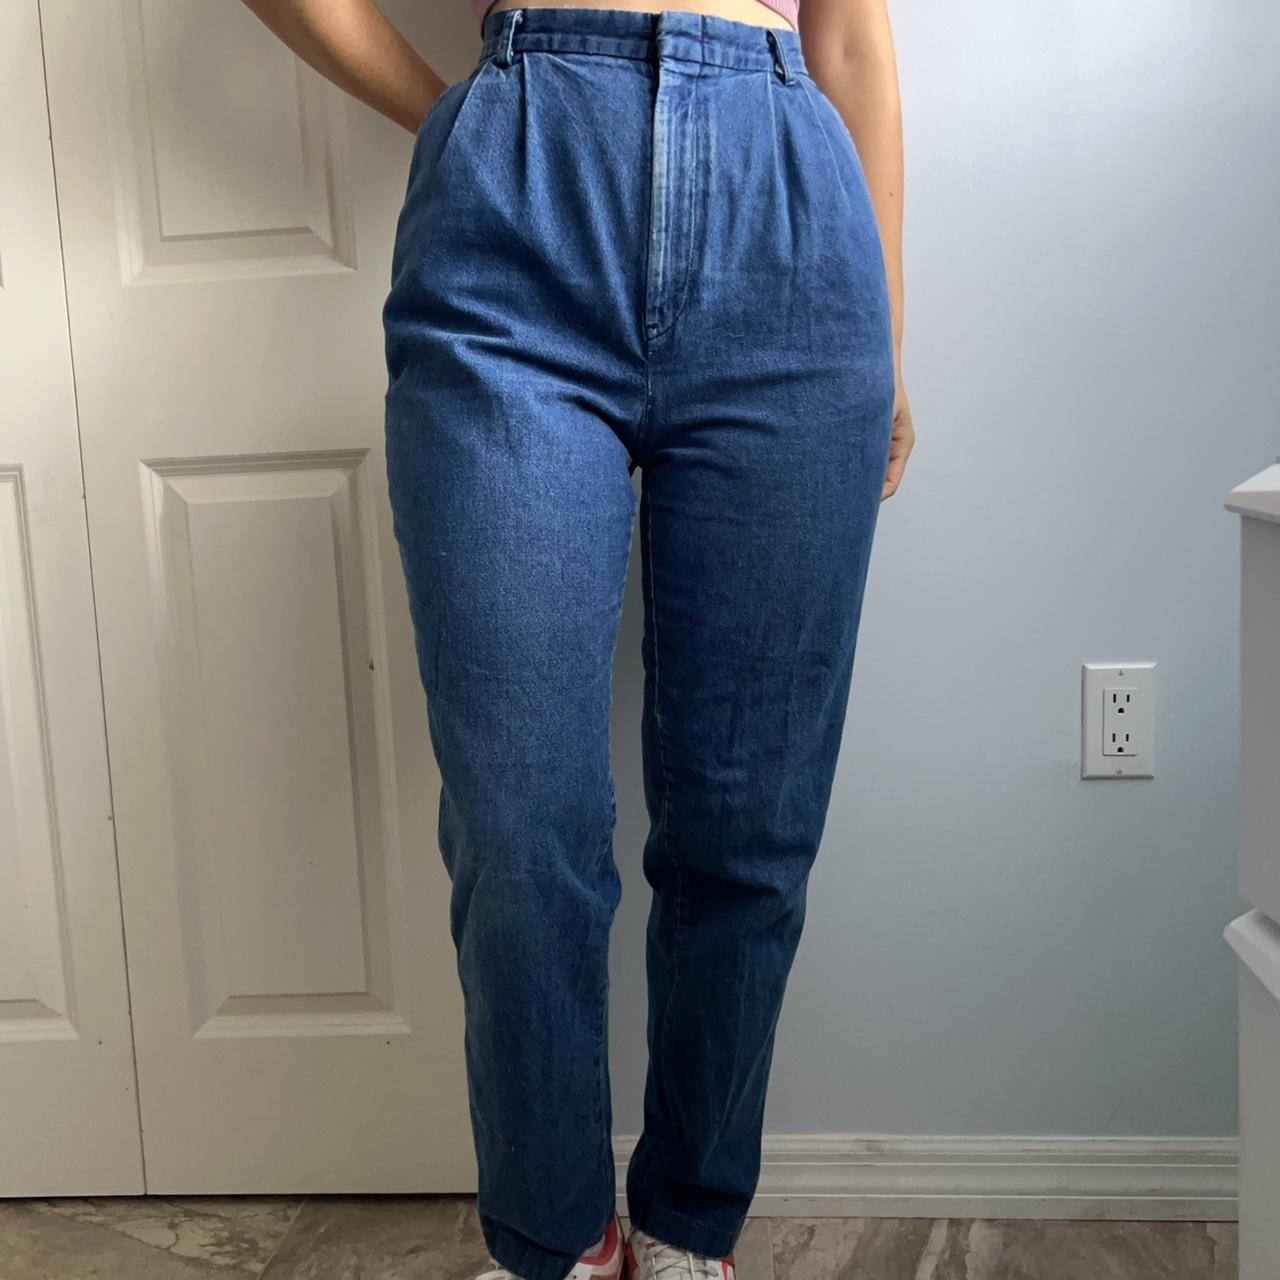 Chic Women's Blue and Navy Jeans (3)